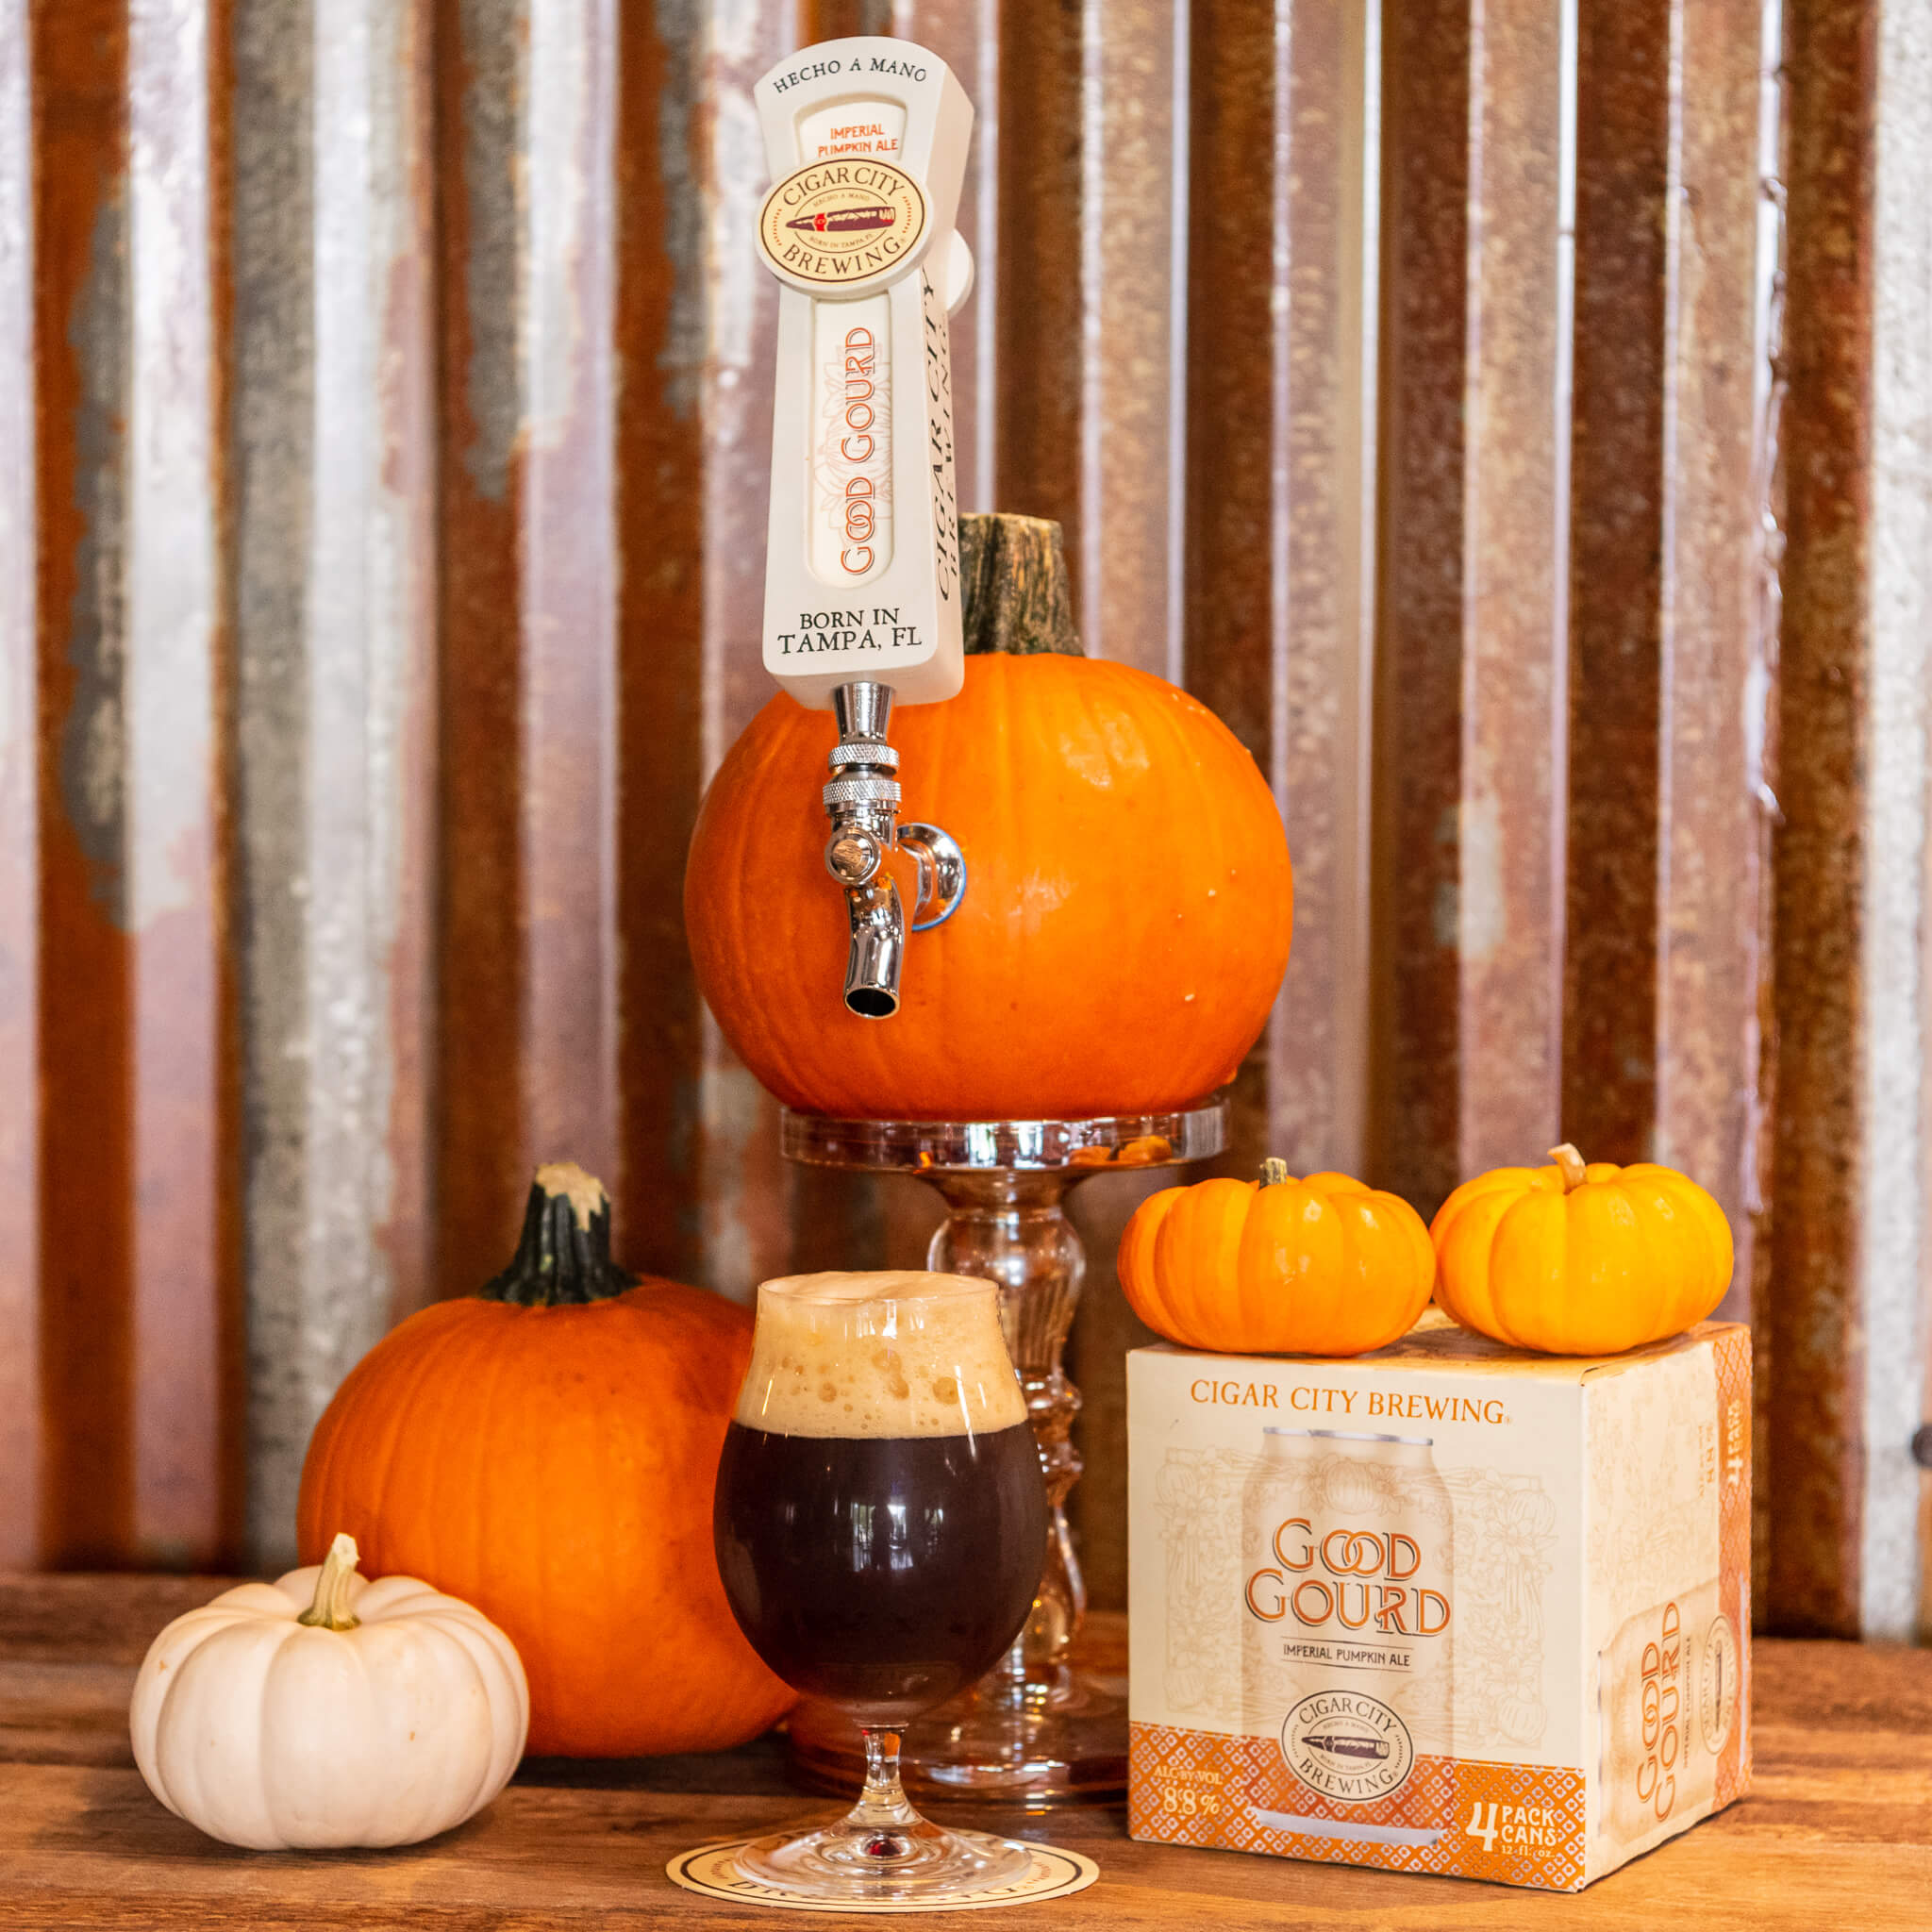 Good Gourd Imperial Pumpkin Ale is now available in the Spruce Street Taproom